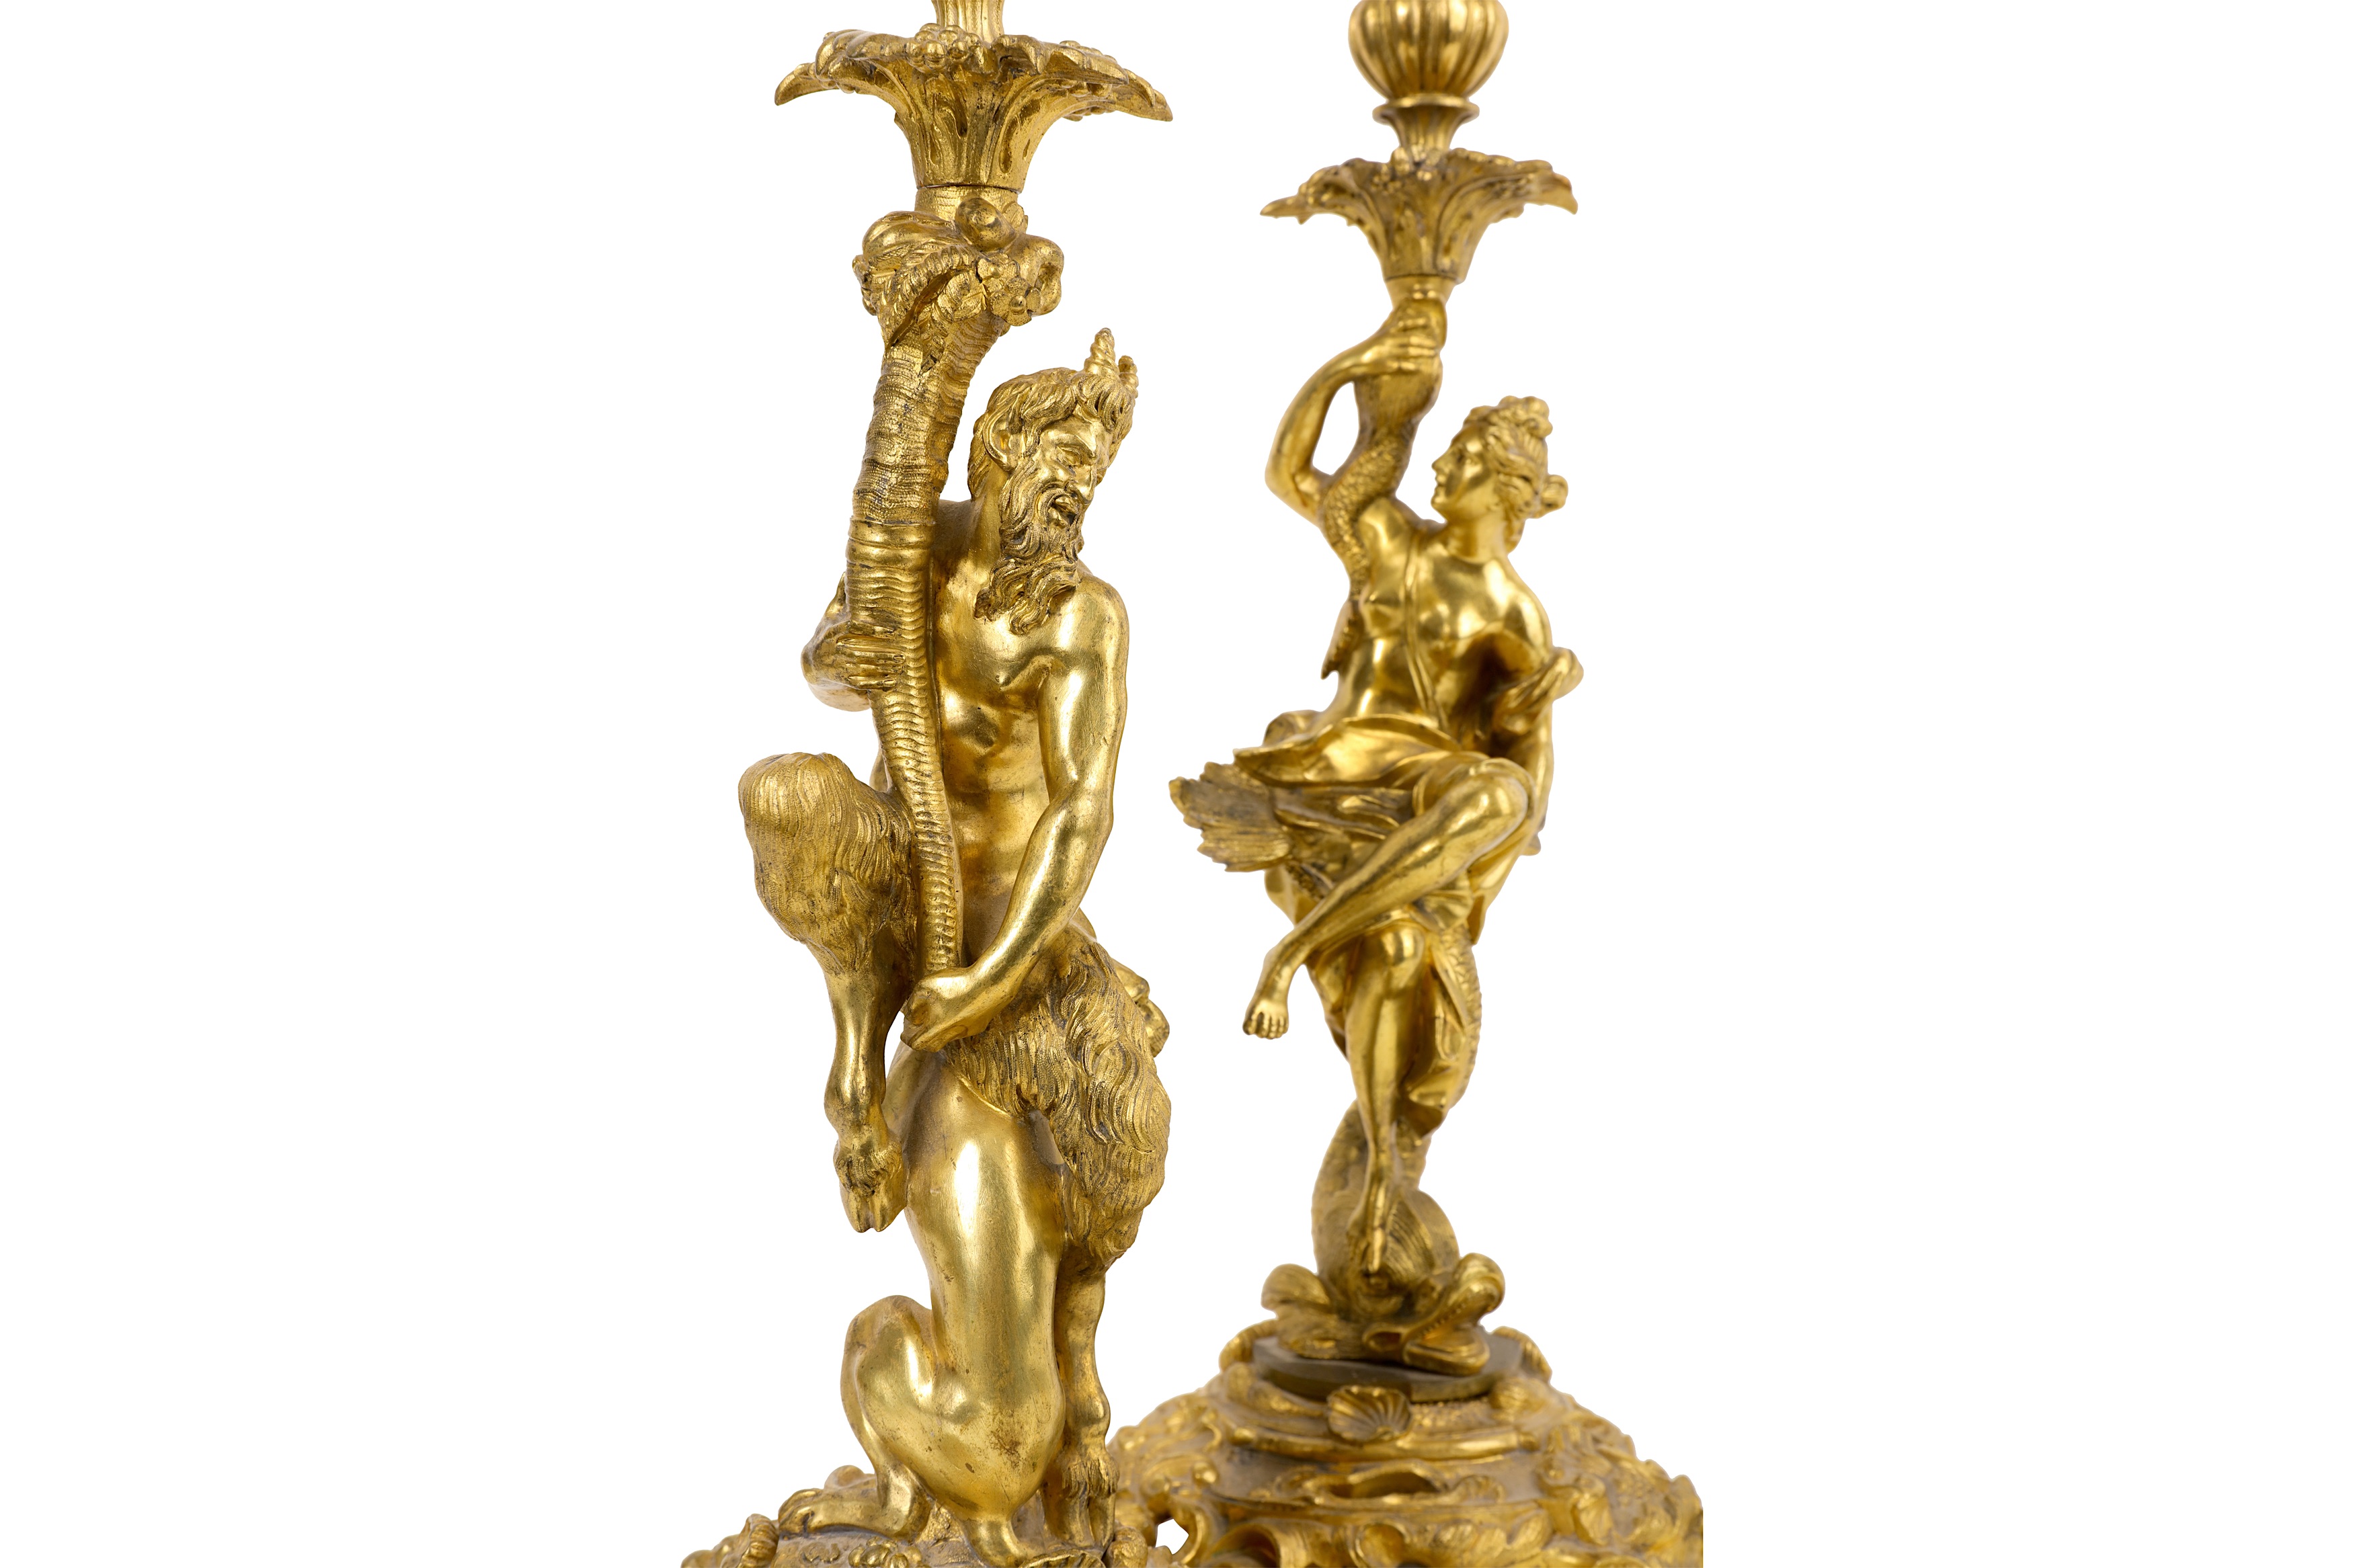 A PAIR OF LATE 18TH / EARLY 19TH CENTURY FRENCH GILT BRONZE CANDLESTICKS AFTER THE MODEL BY - Image 7 of 7